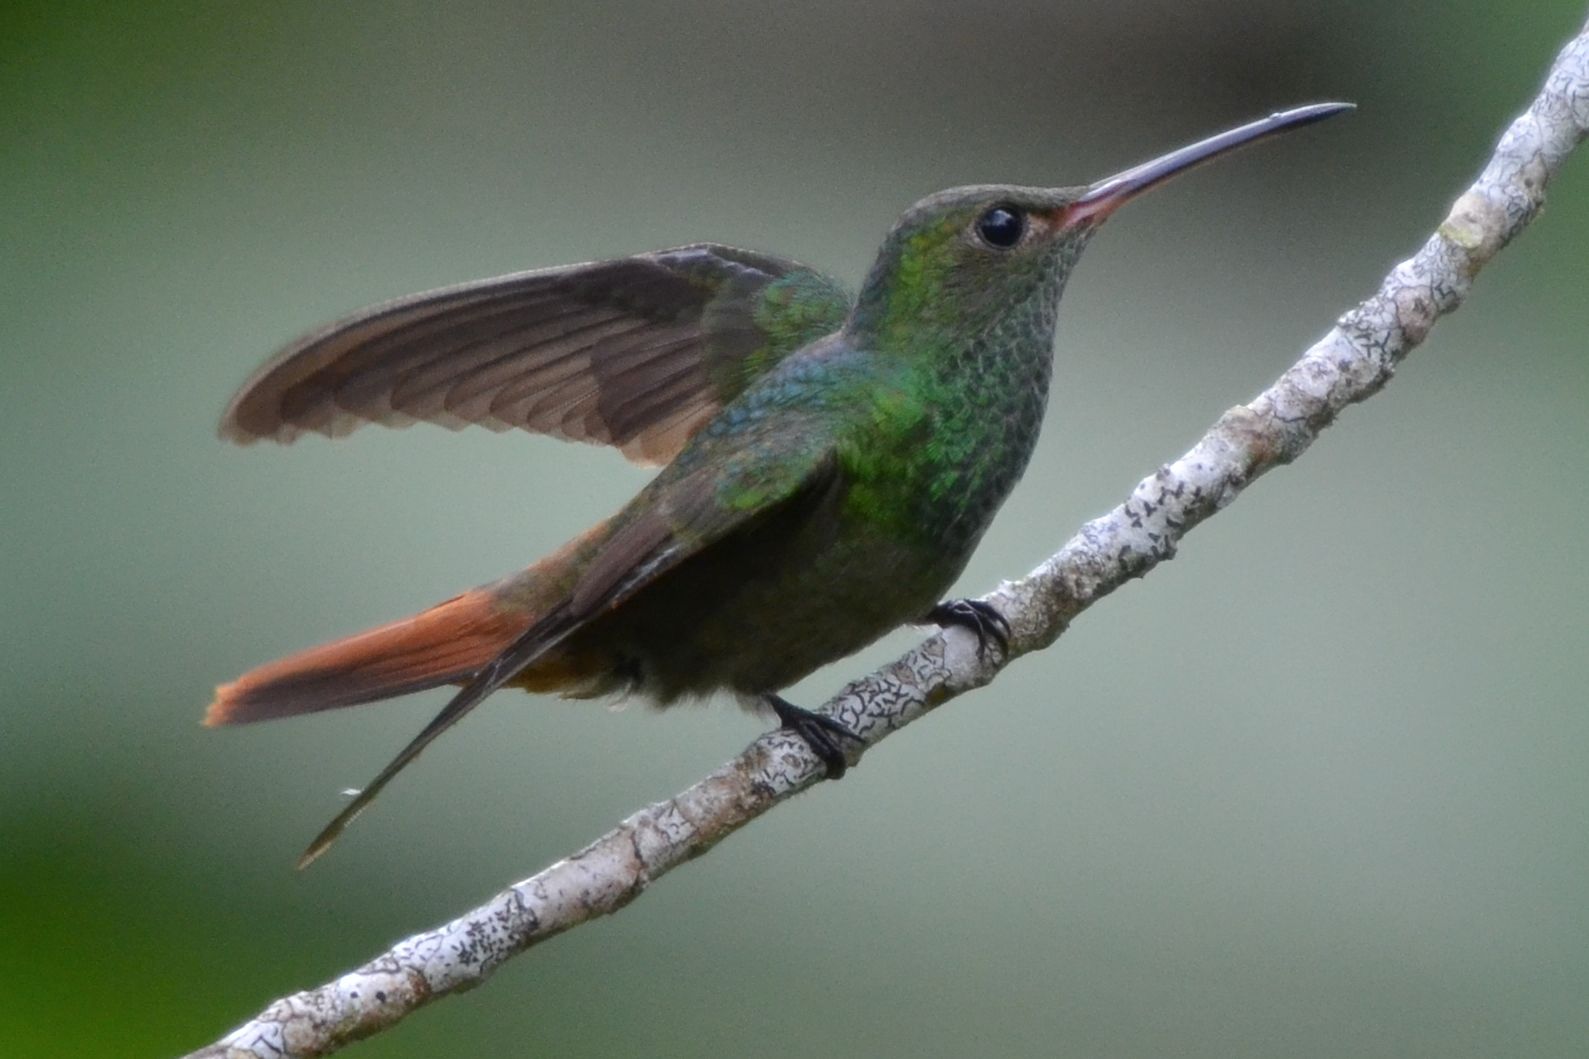 Click picture to see more Rufous-tailed Hummingbirds.